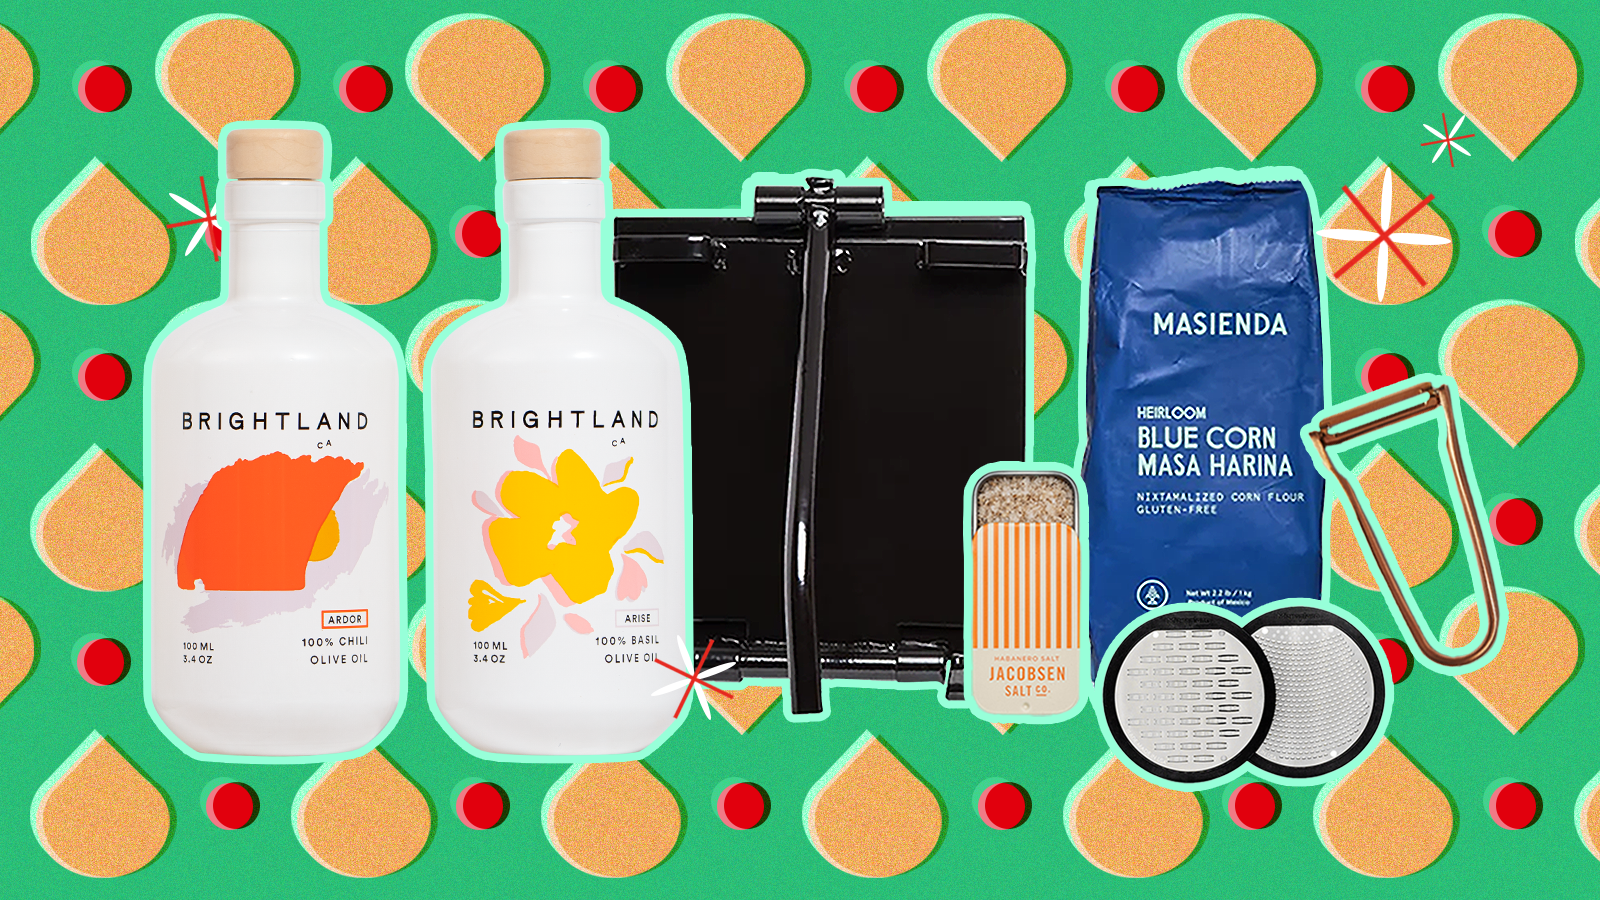 A selection of items on a midcentury-inspired patterned backdrop, including olive oil, a tortilla press, tins of salt, a bag of masa and graters